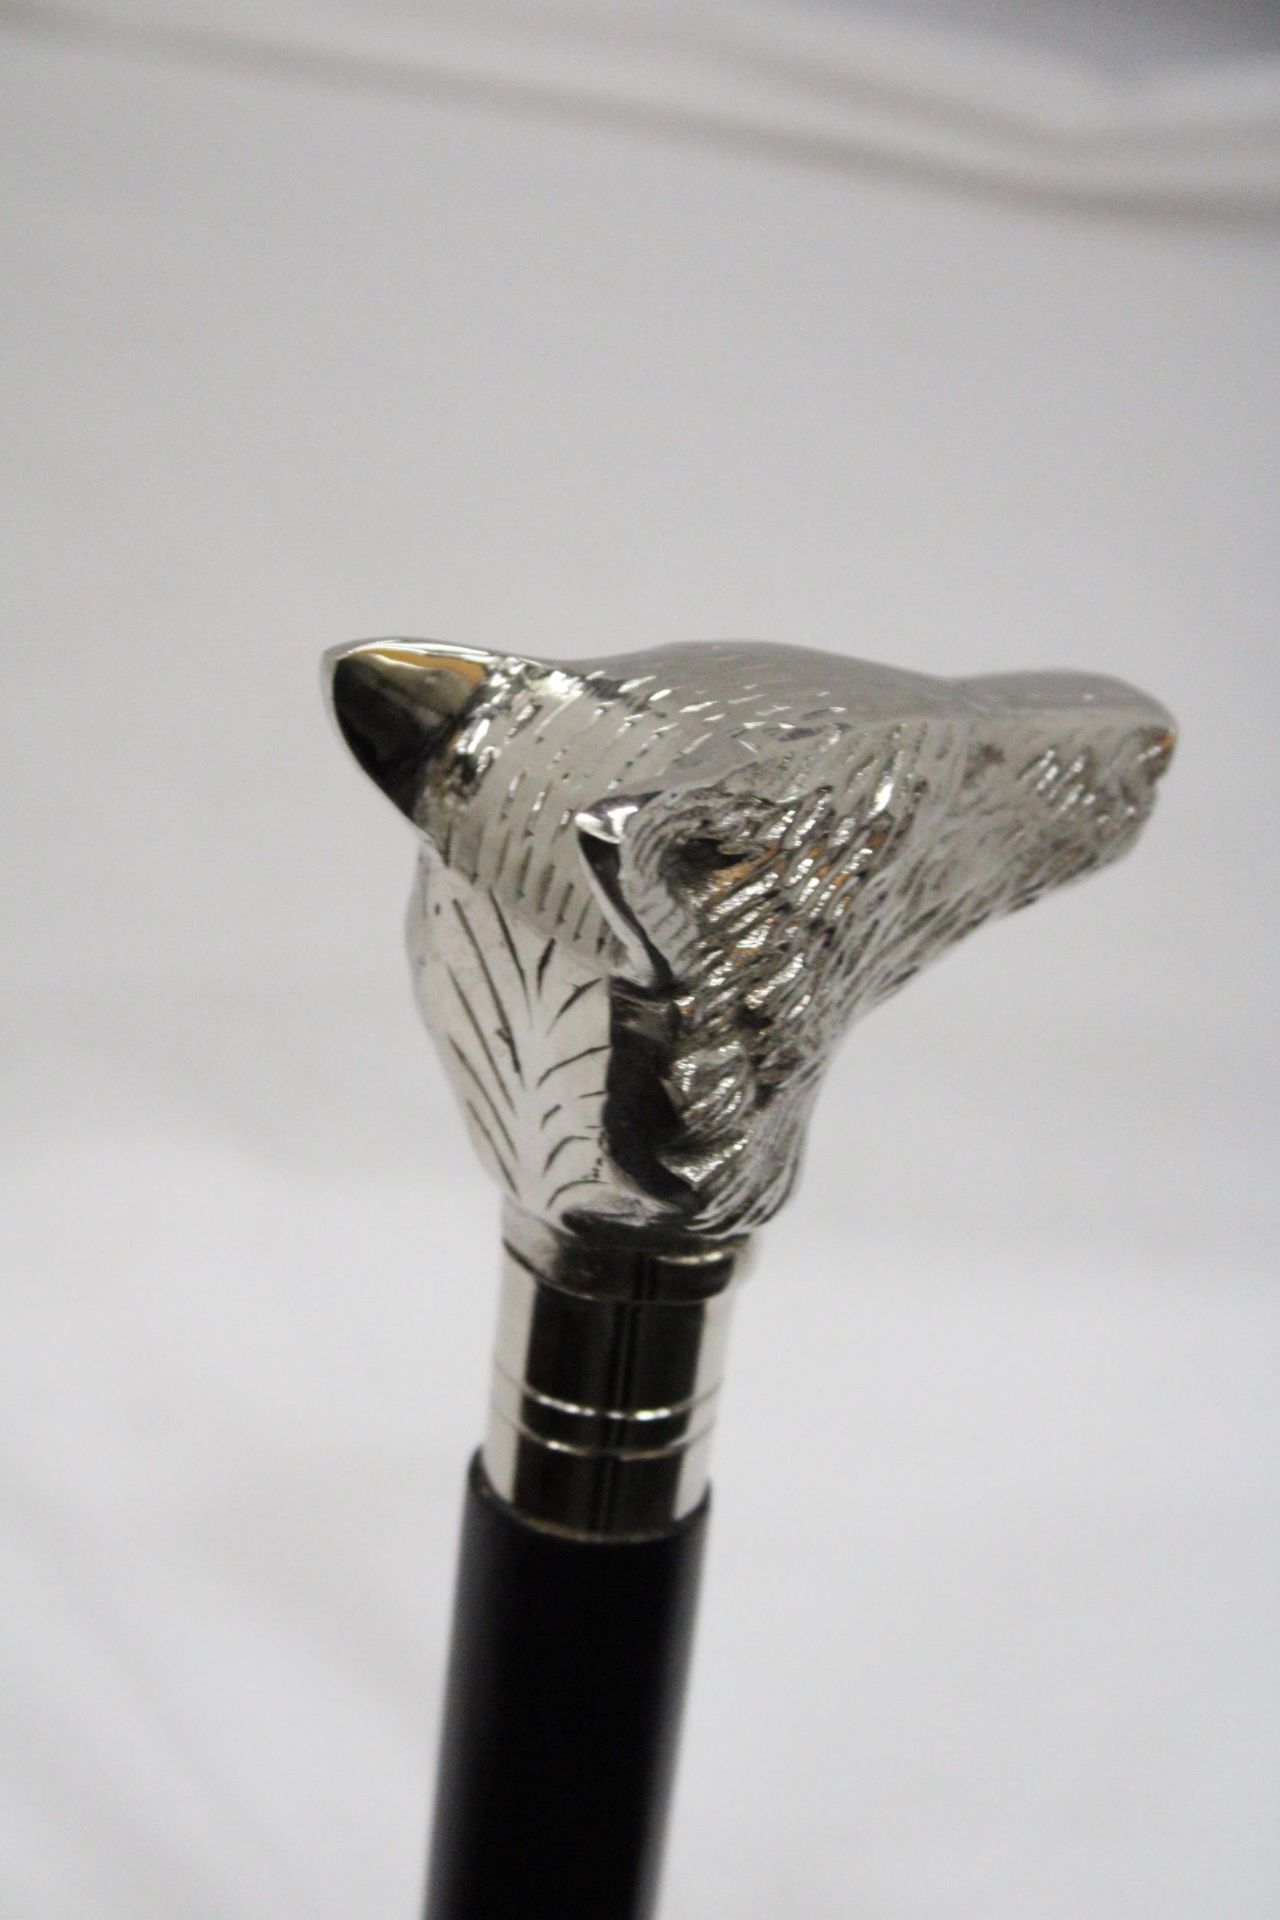 A WALKING STICK WITH A CHROME WOLF HANDLE - Image 4 of 6